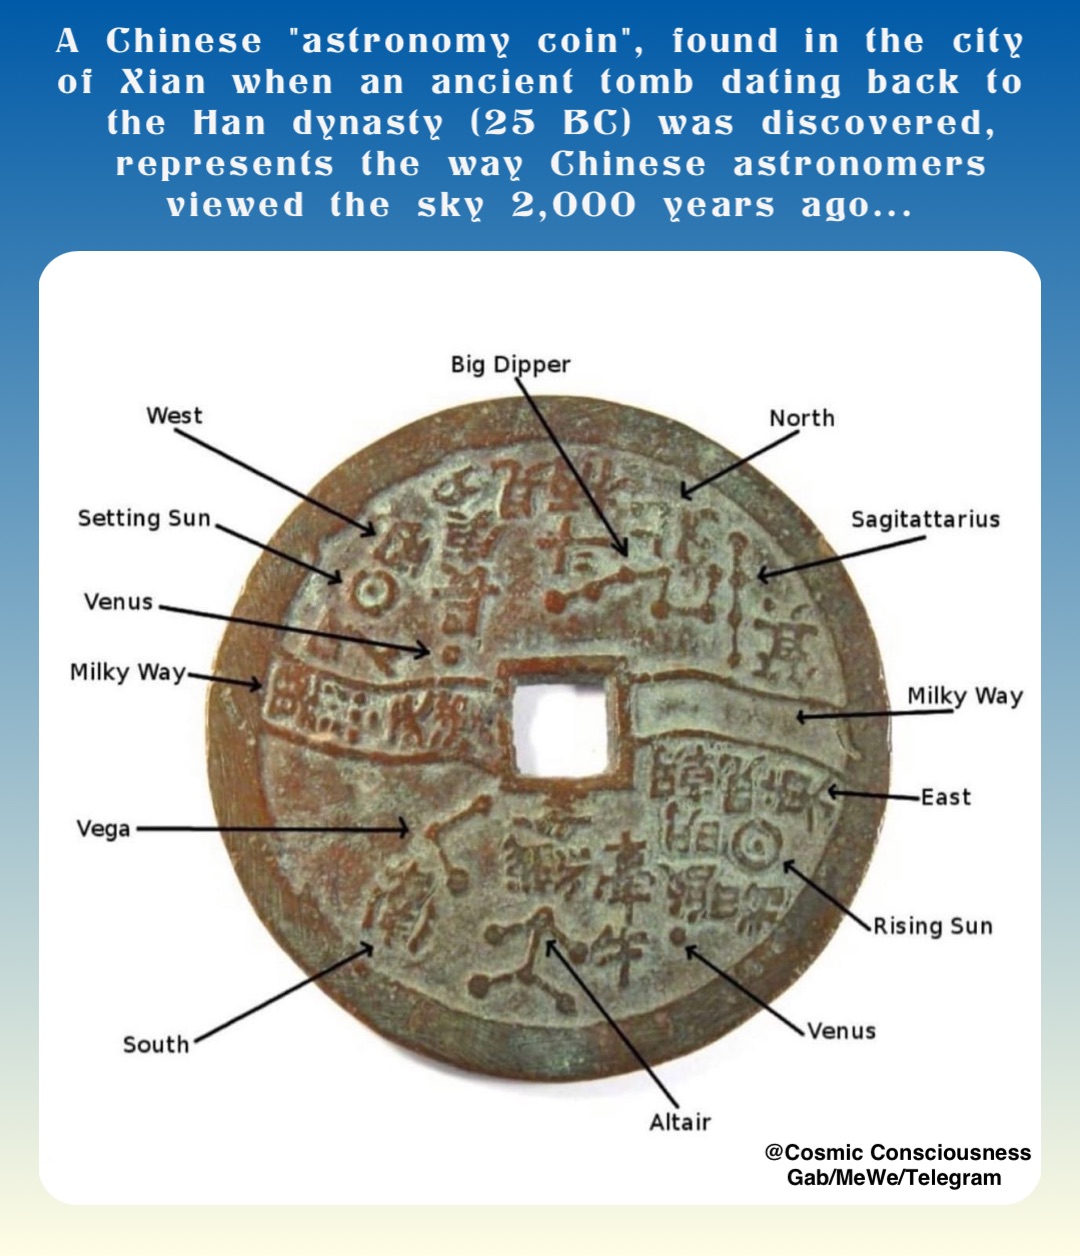 A Chinese "astronomy coin", found in the city of Xian when an ancient tomb dating back to the Han dynasty (25 BC) was discovered, represents the way Chinese astronomers viewed the sky 2,000 years ago... @Cosmic Consciousness 
Gab/MeWe/Telegram